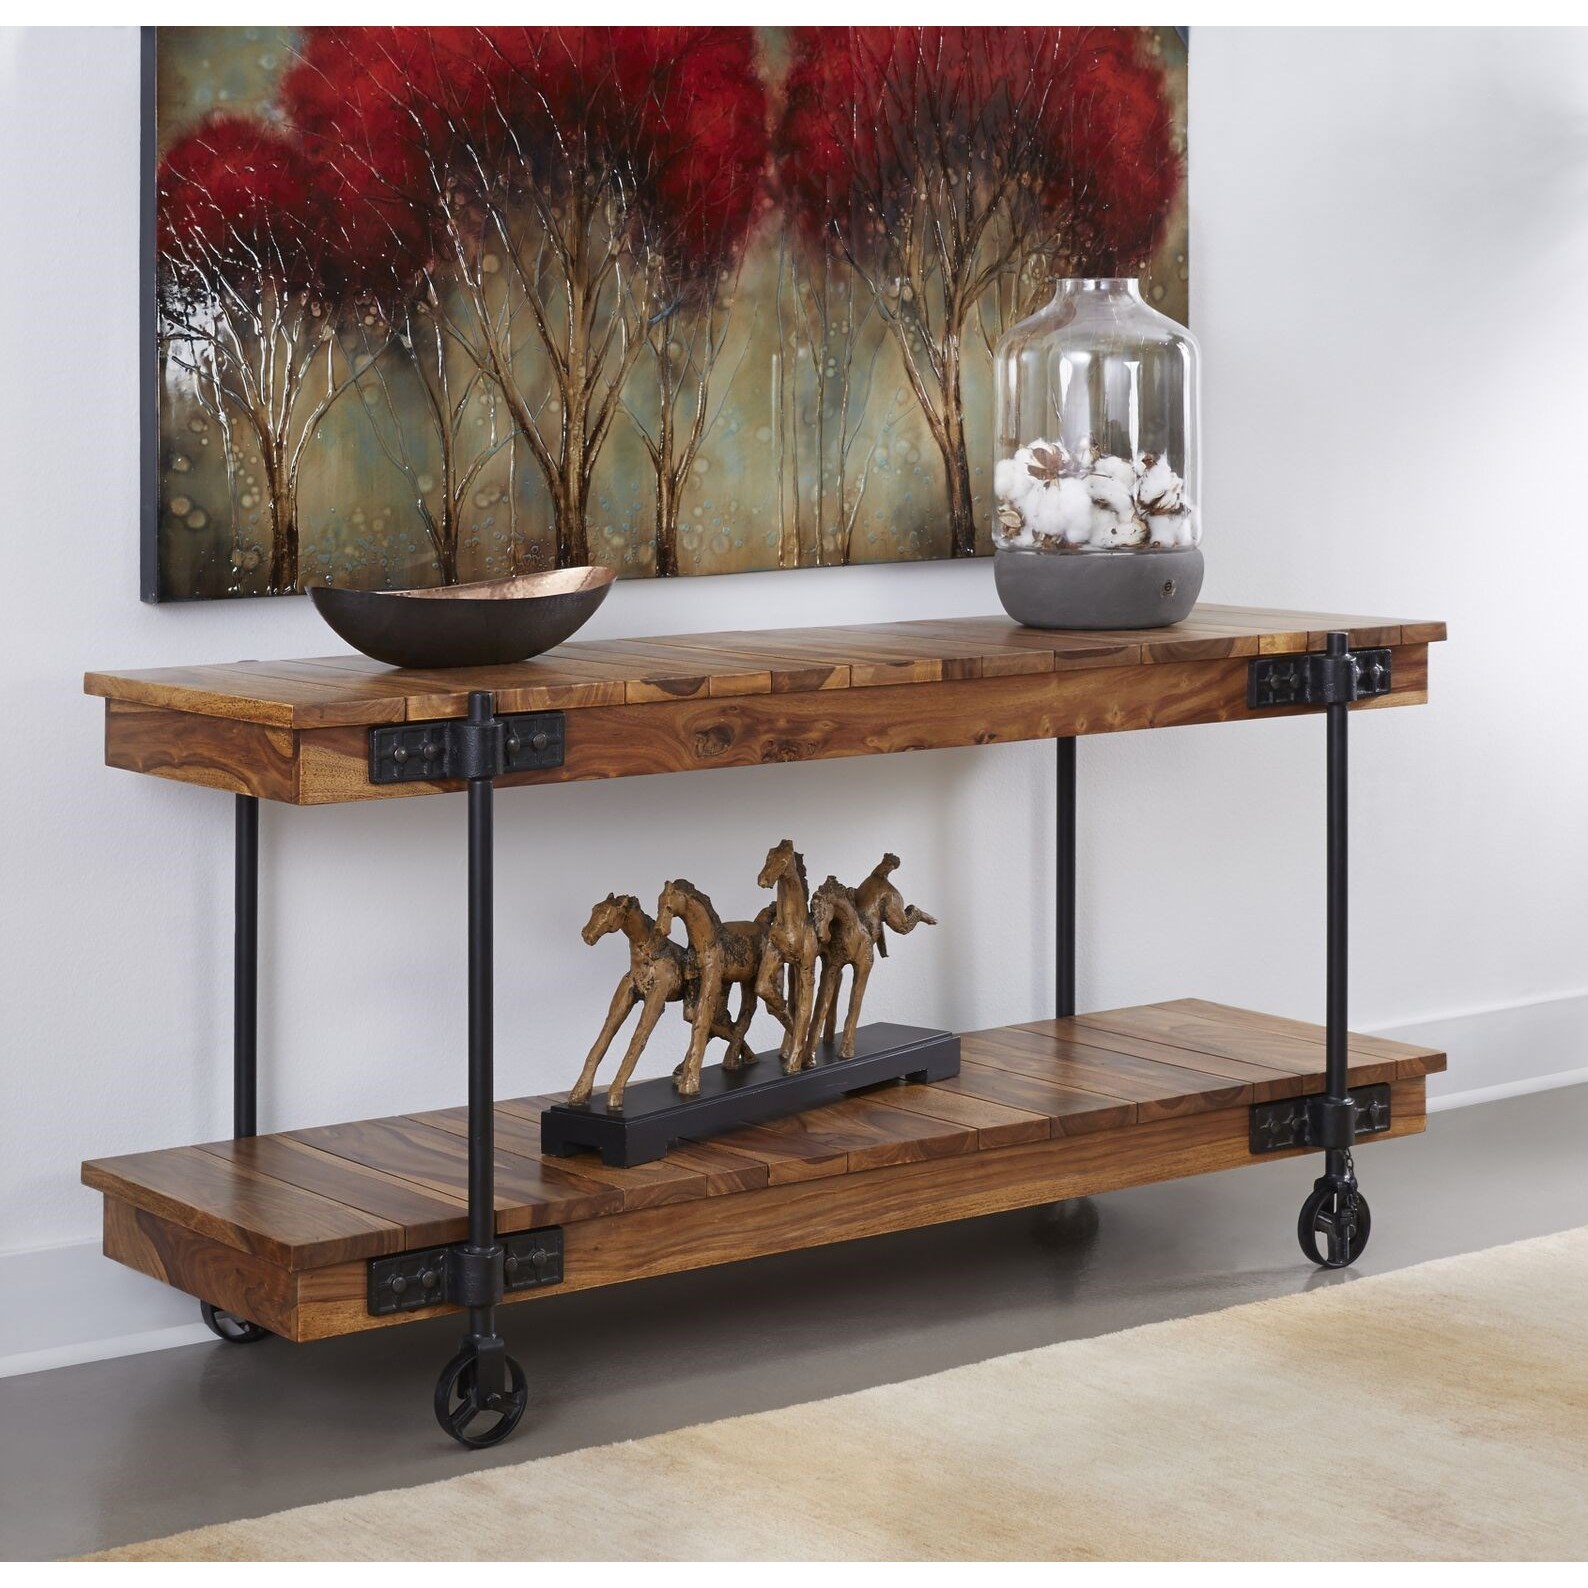 37104 Accents Industrial Console Table $389